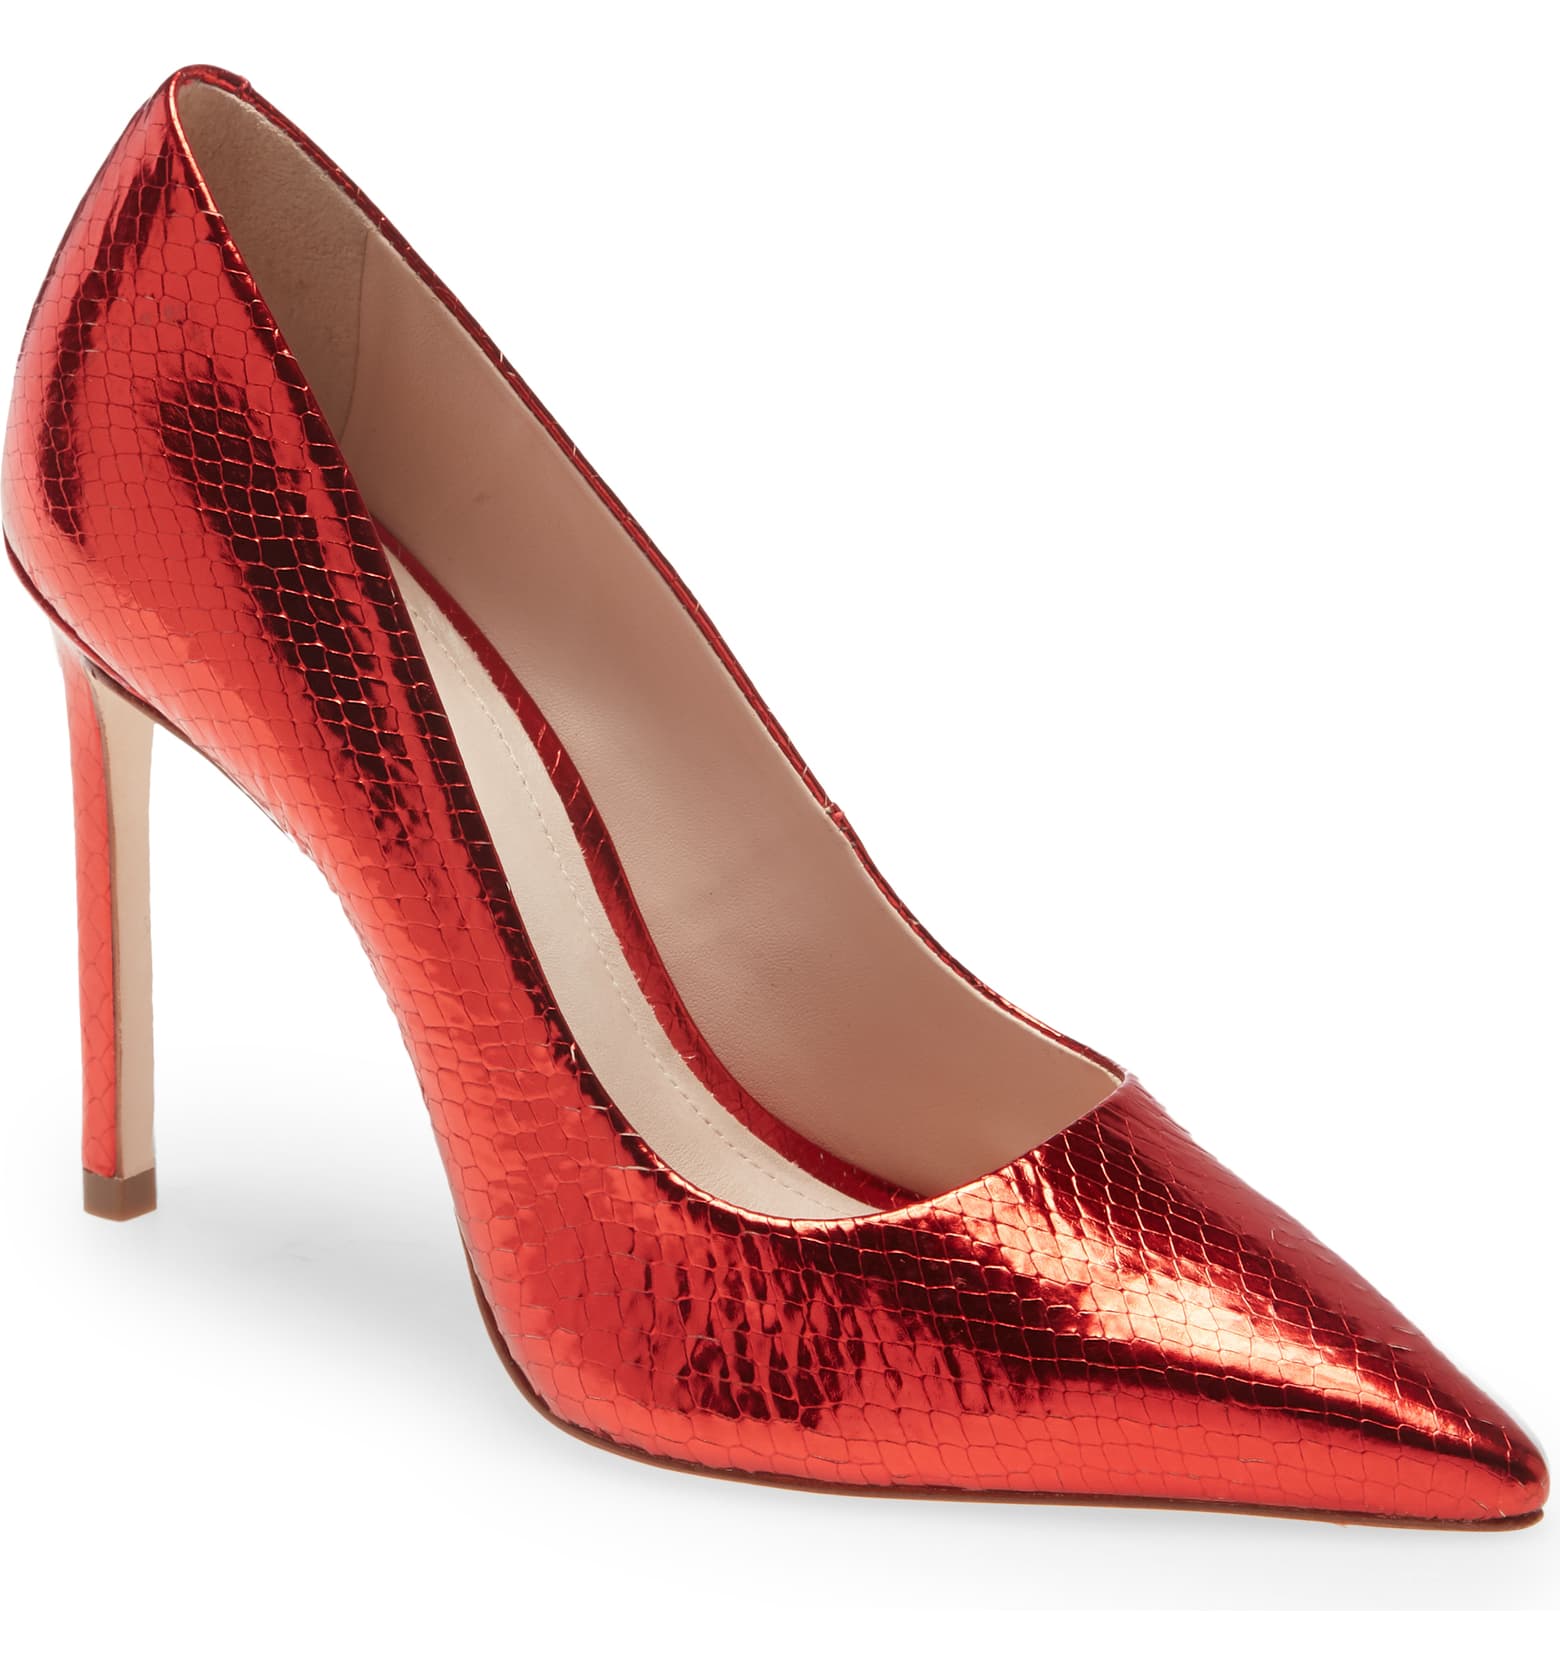 holiday pumps FASHIONISTA GIFT